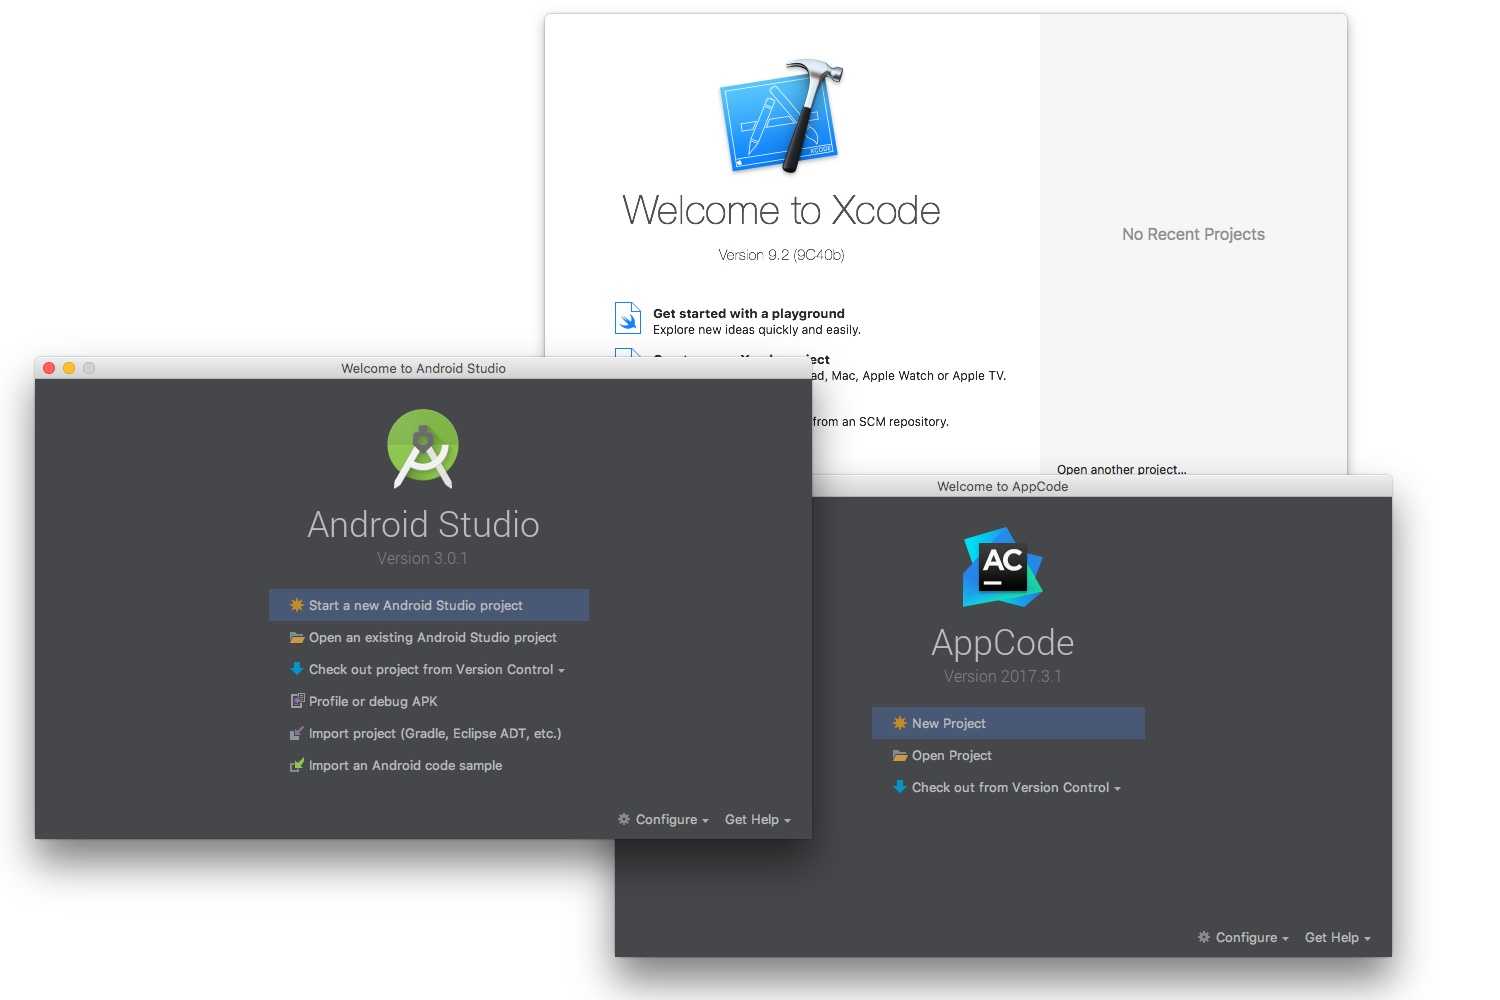 Mobile Development: Android Studio and Xcode